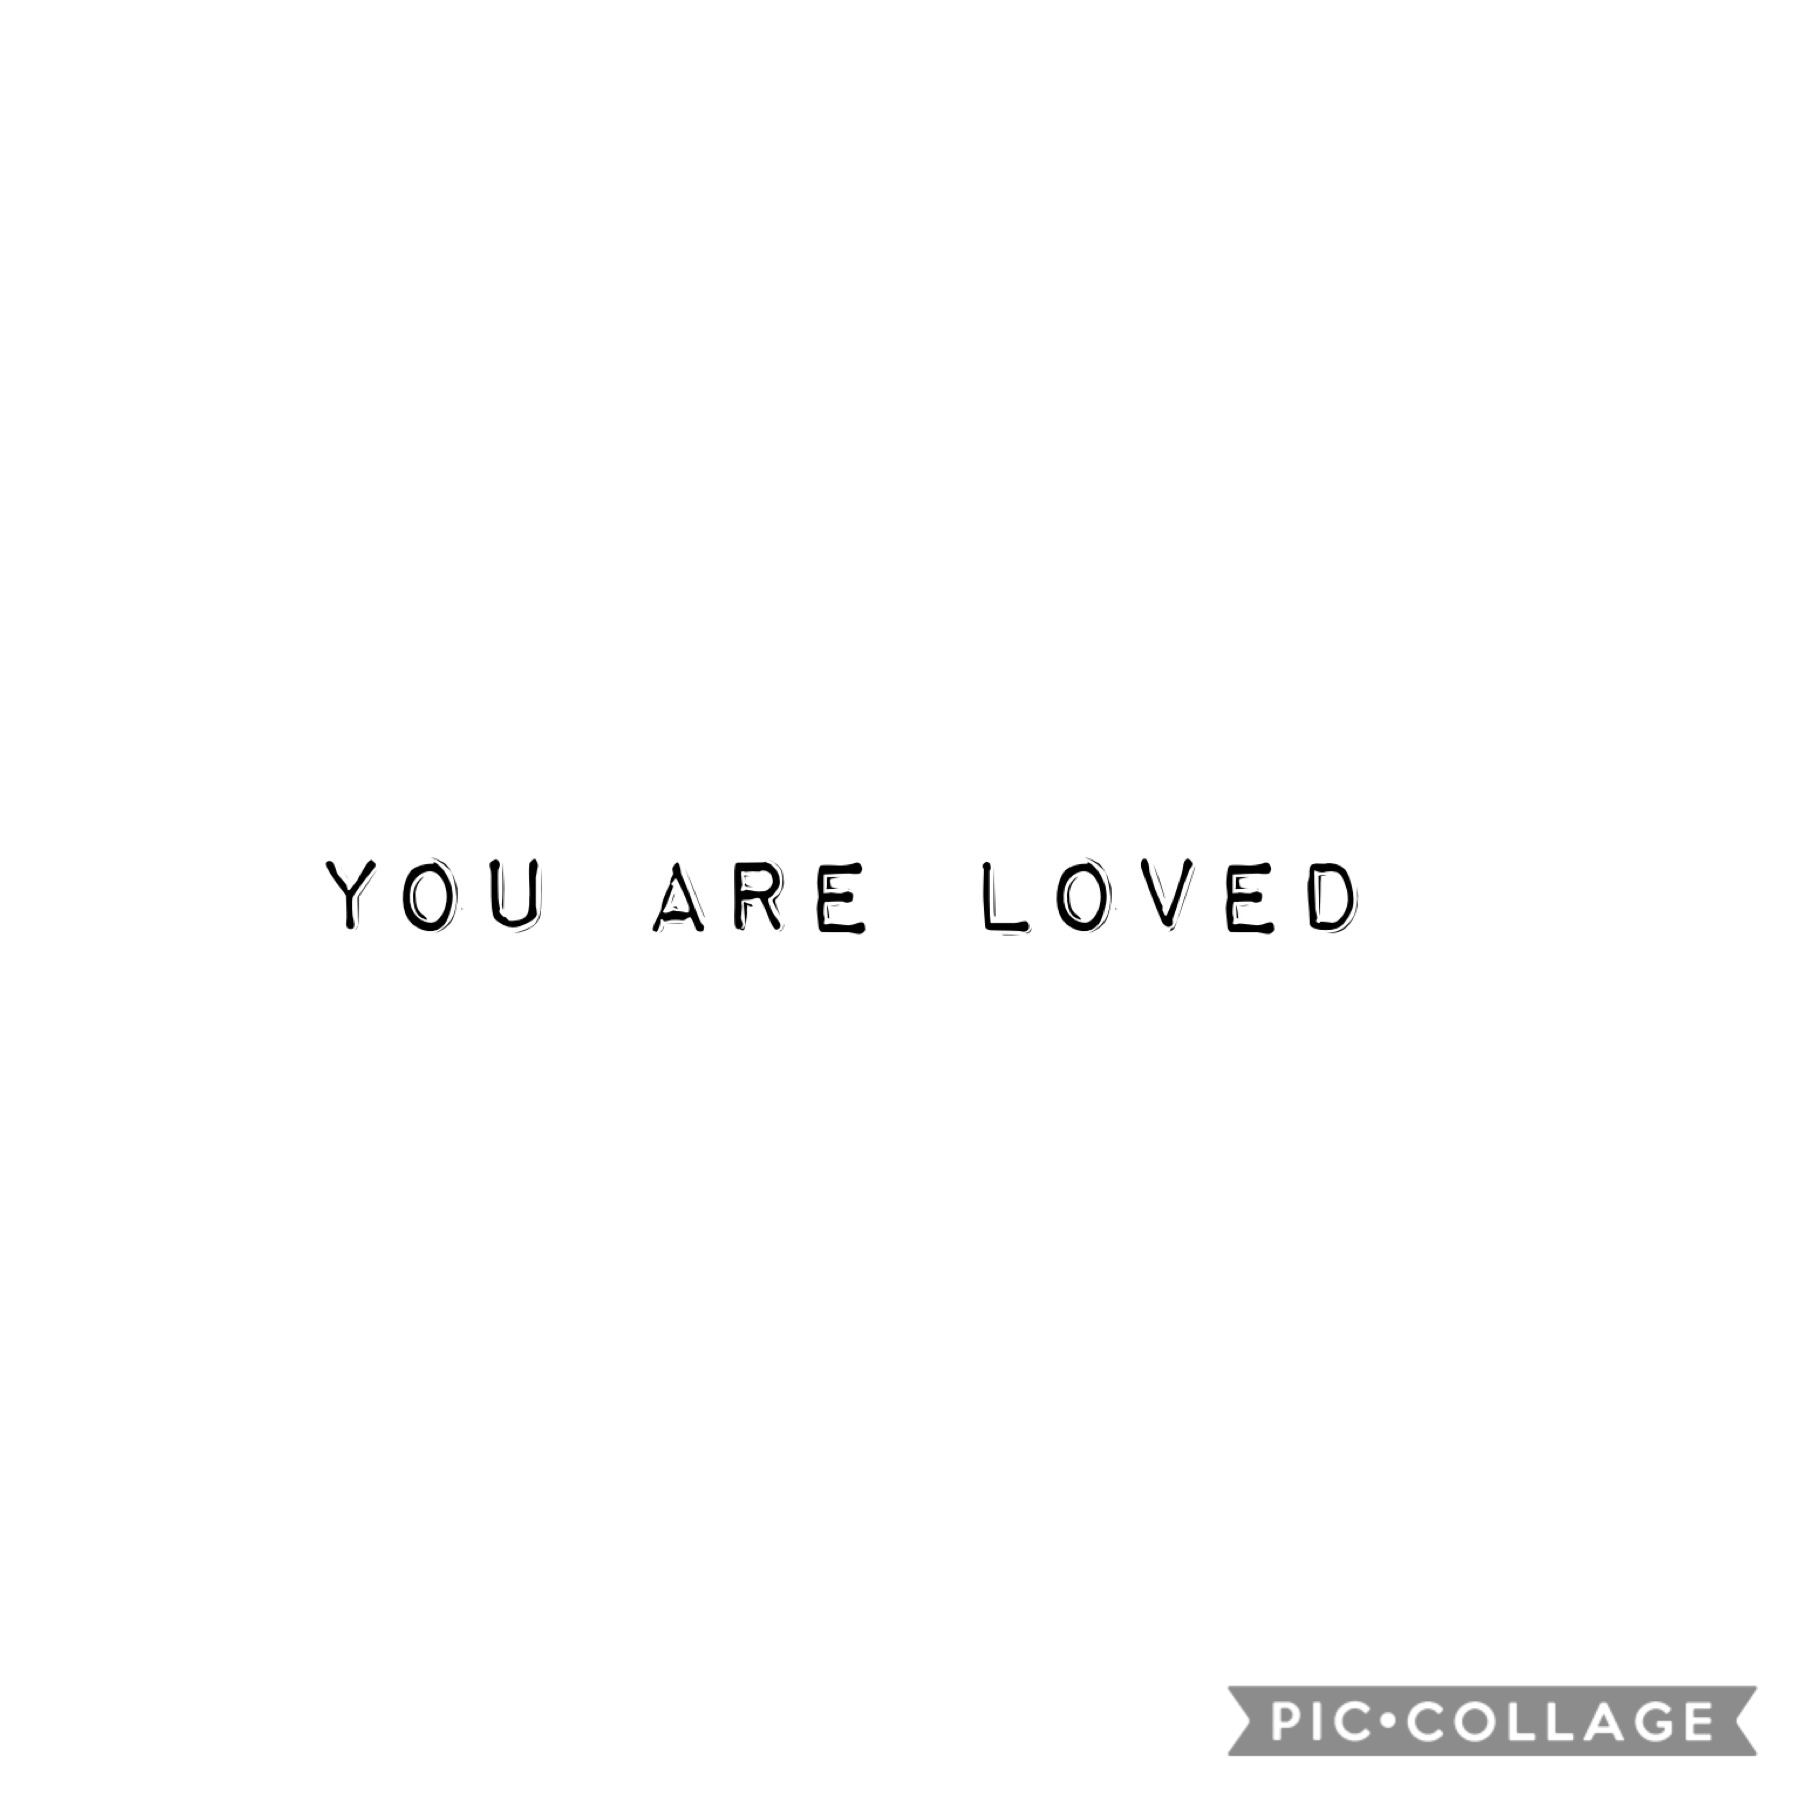 You are loved 